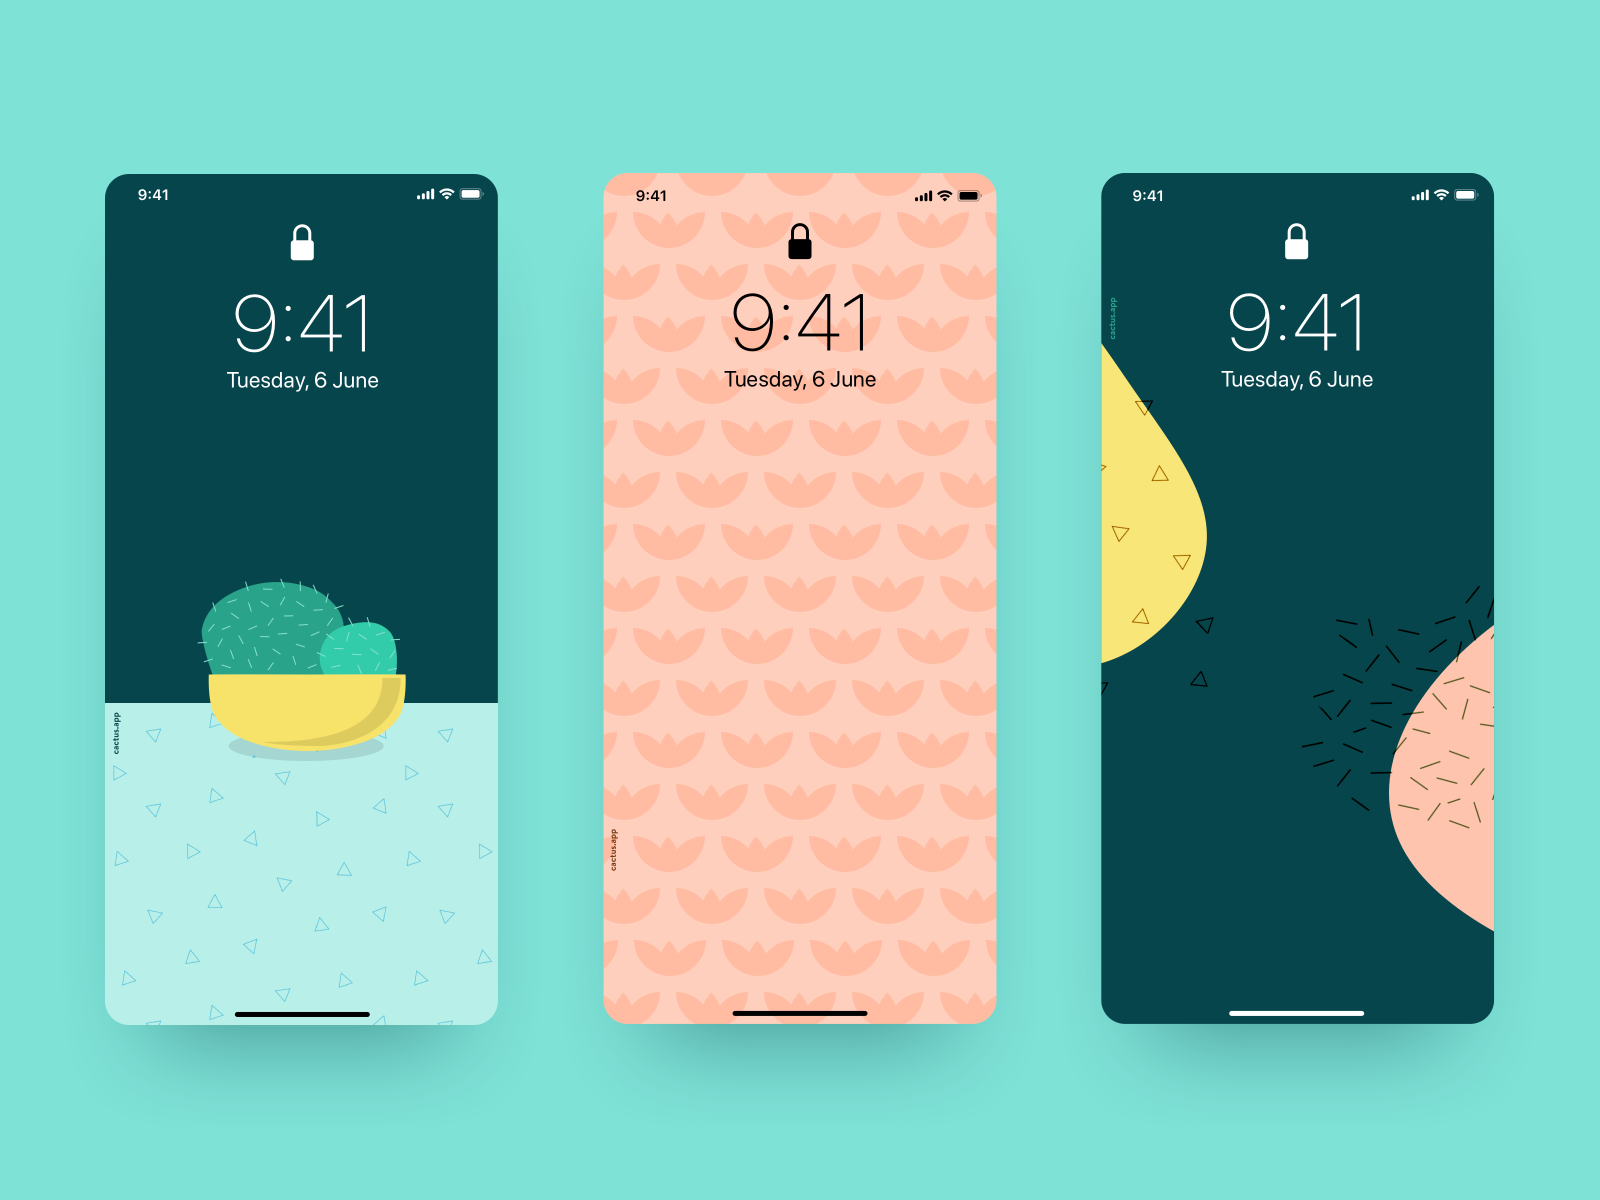 More Free Wallpapers by Katie Blackman on Dribbble